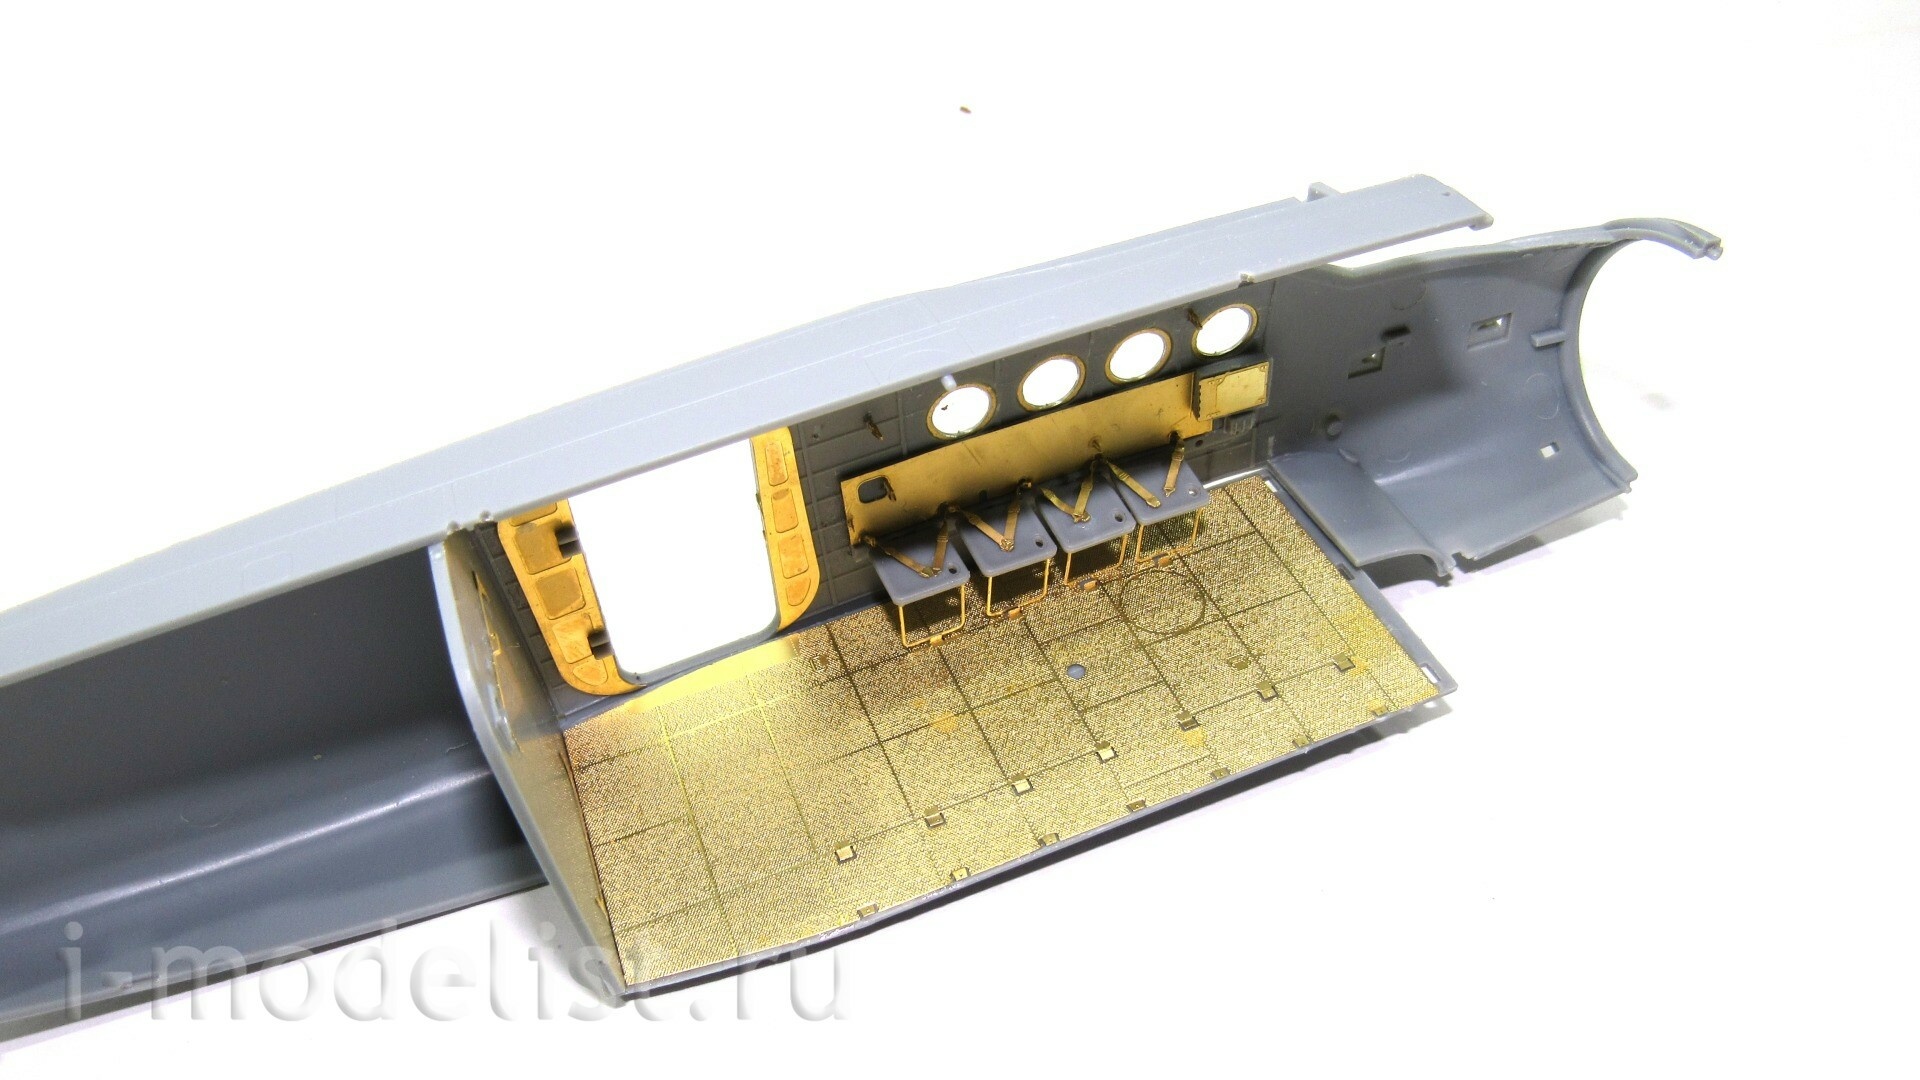 048043 Microdesign 1/48 Photo etching kit for AN-2 (landing and transport compartment)